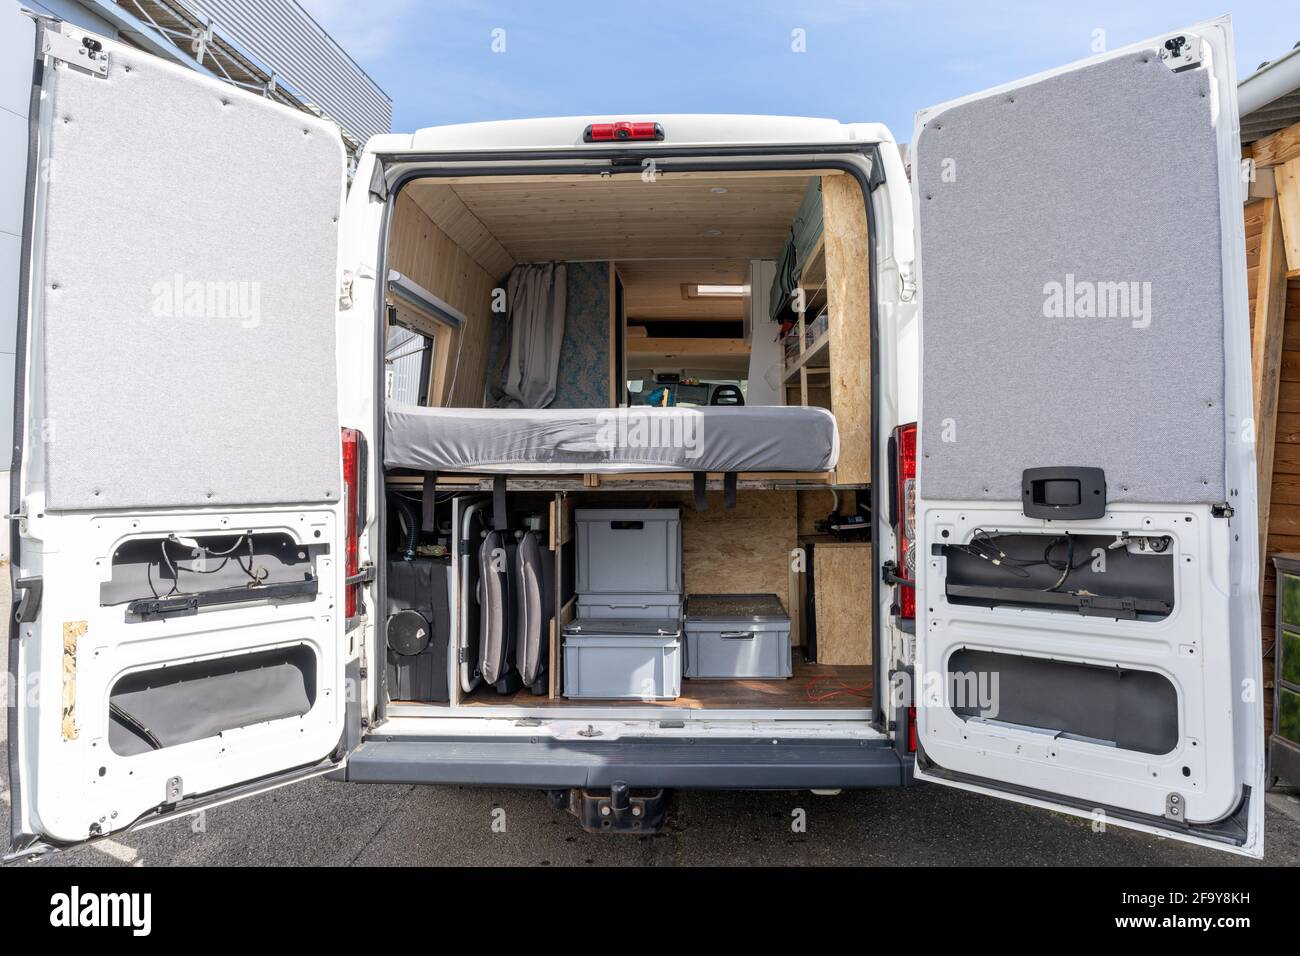 interior view of a self-build camper van in the finishing stages Stock Photo